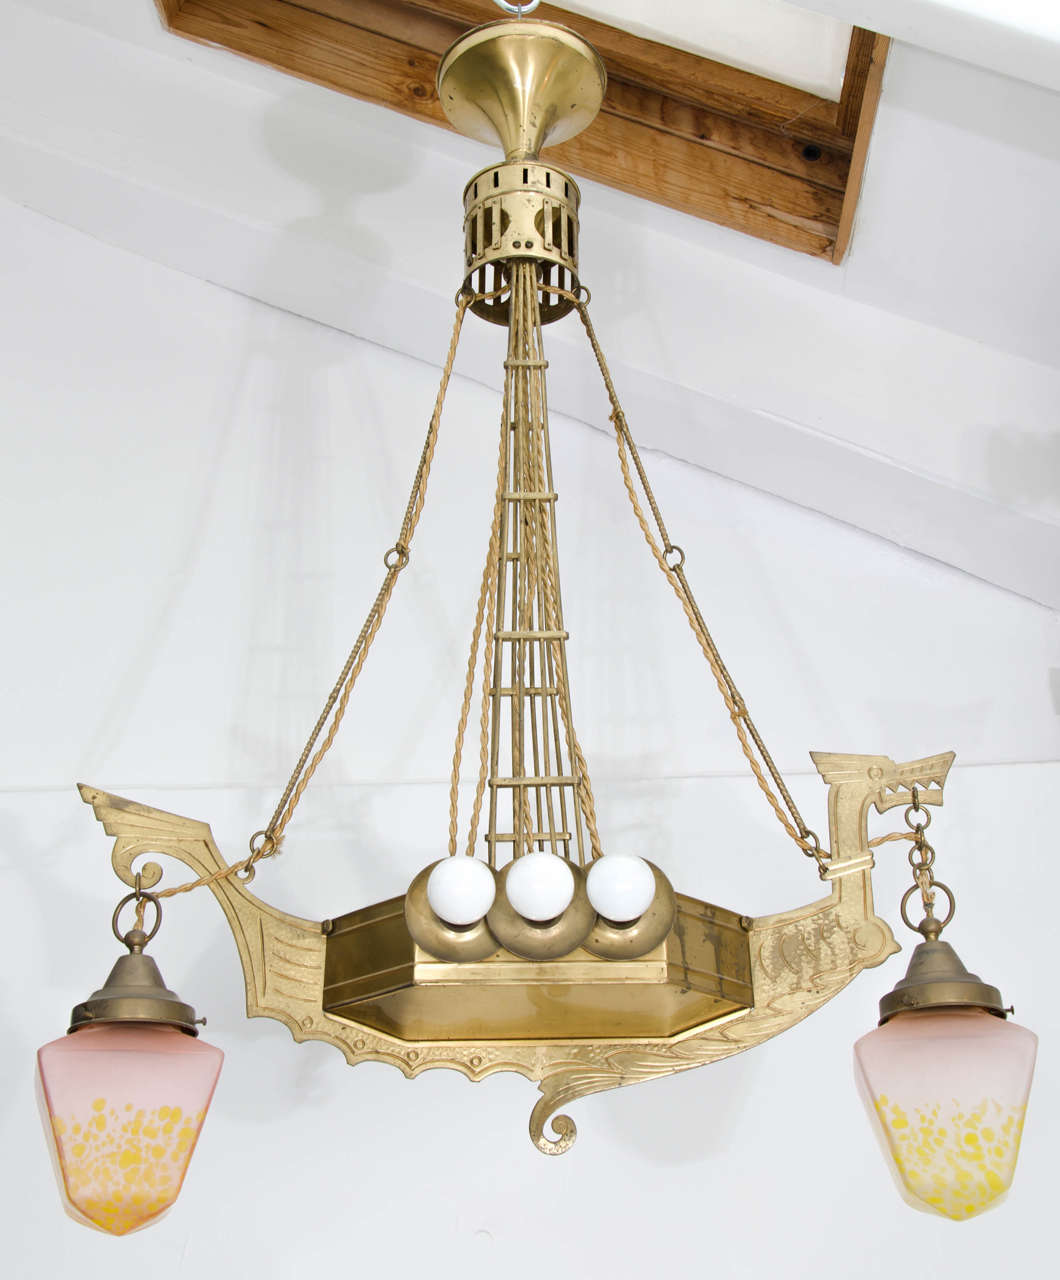 Highly unusual Art Nouveau or Secessionist chandelier. Early 20th Century, European, probably German or Austrian.

The chandelier has a brass frame - partly hammered - in the shape of a viking ship with dragon's head at the prow. The frame carries